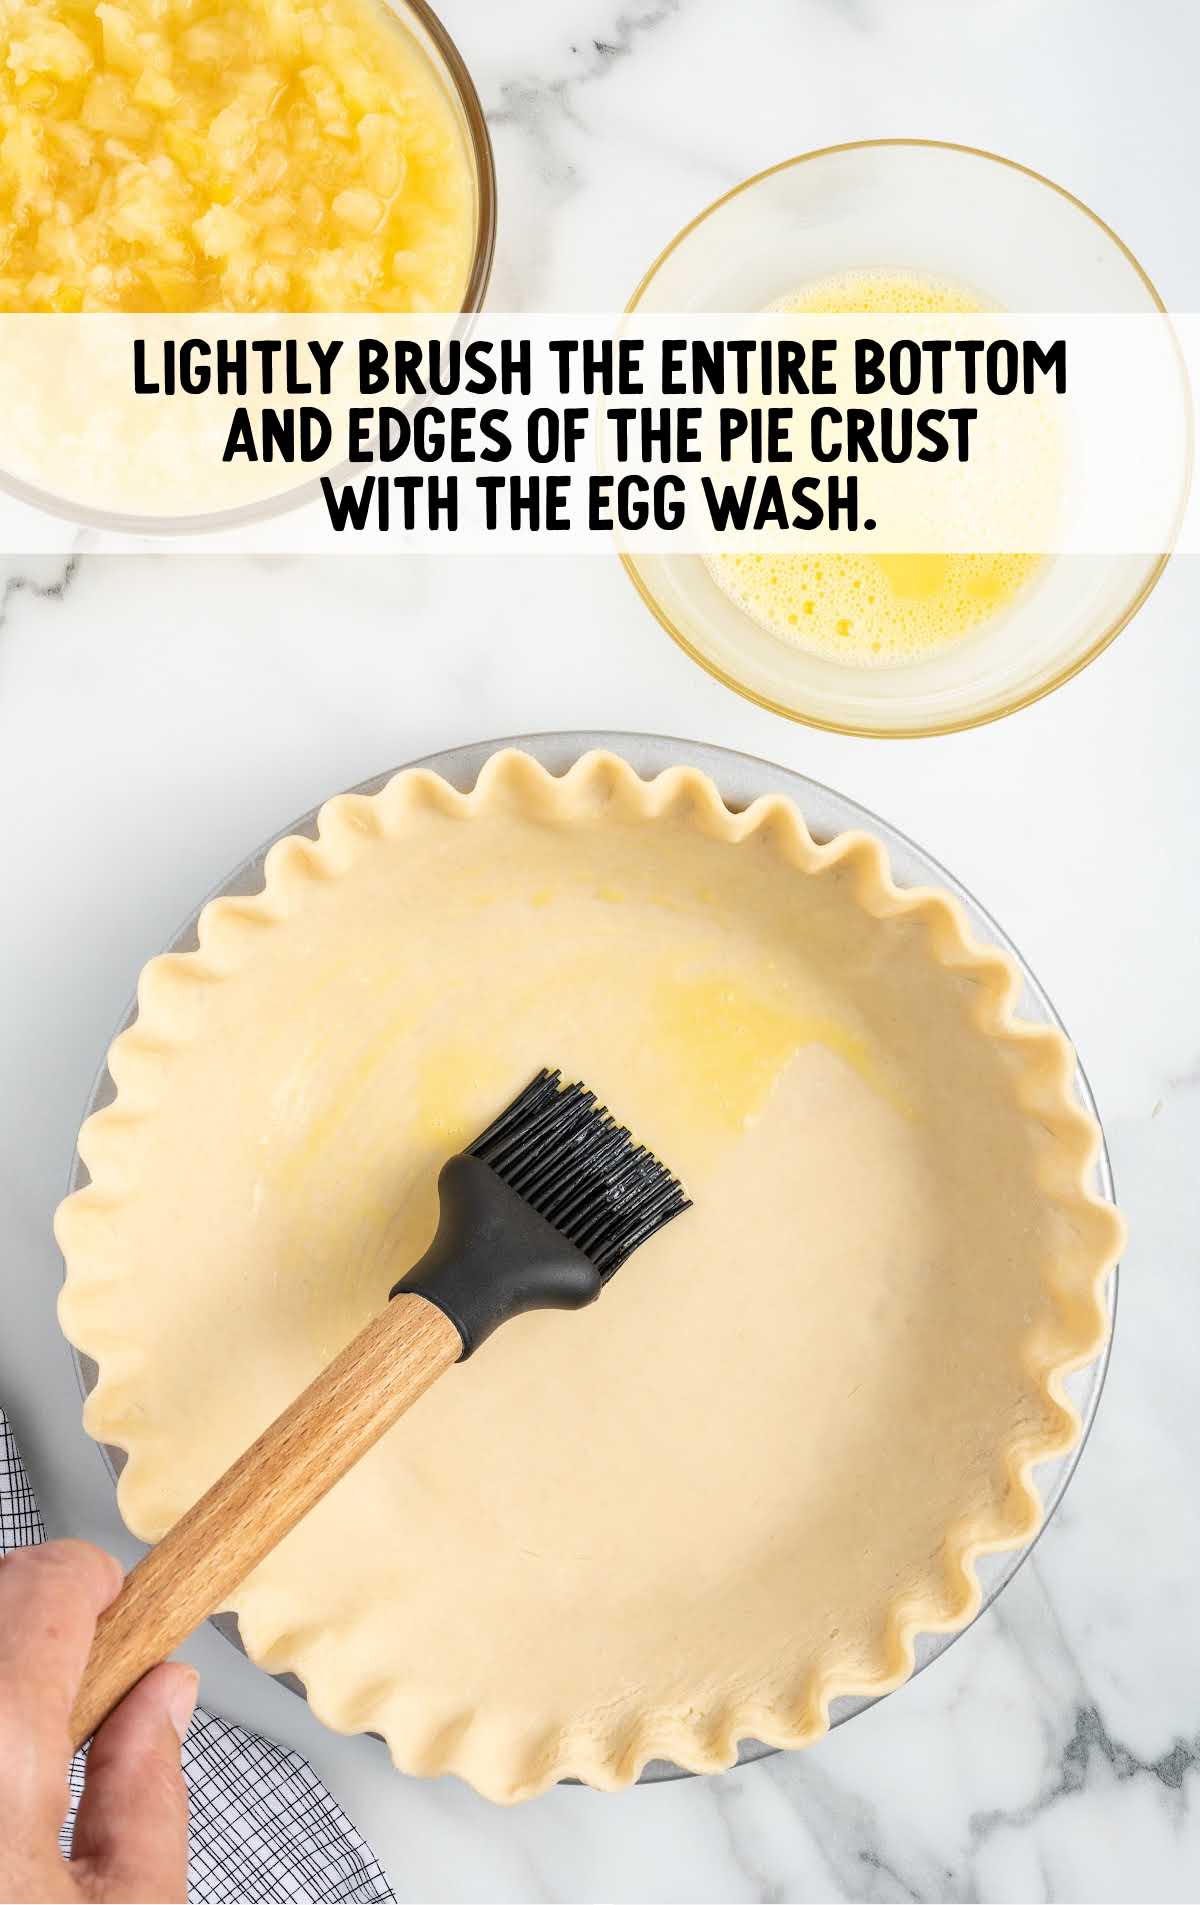 egg wash brushed on the bottom and edges of the pie crust